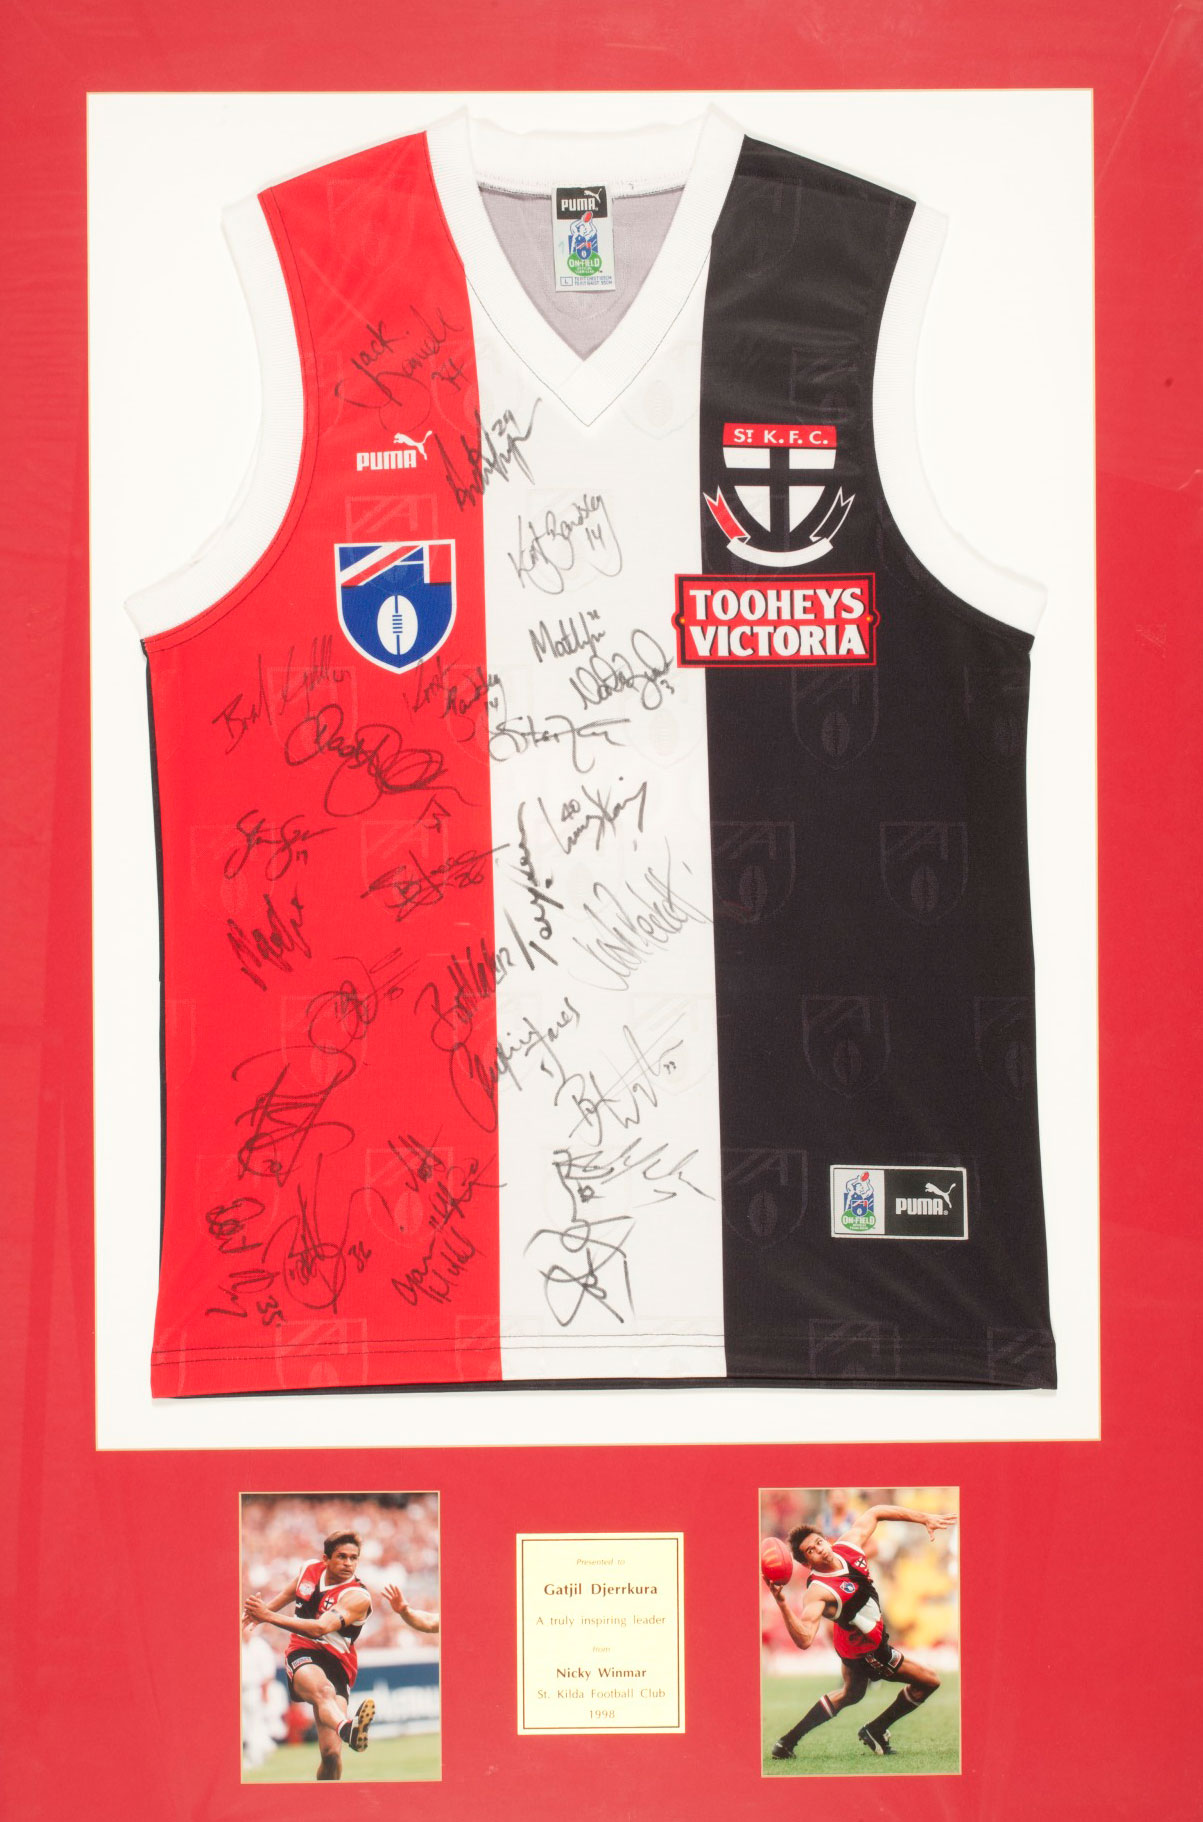 Framed and signed St Kilda Football Club jersey.